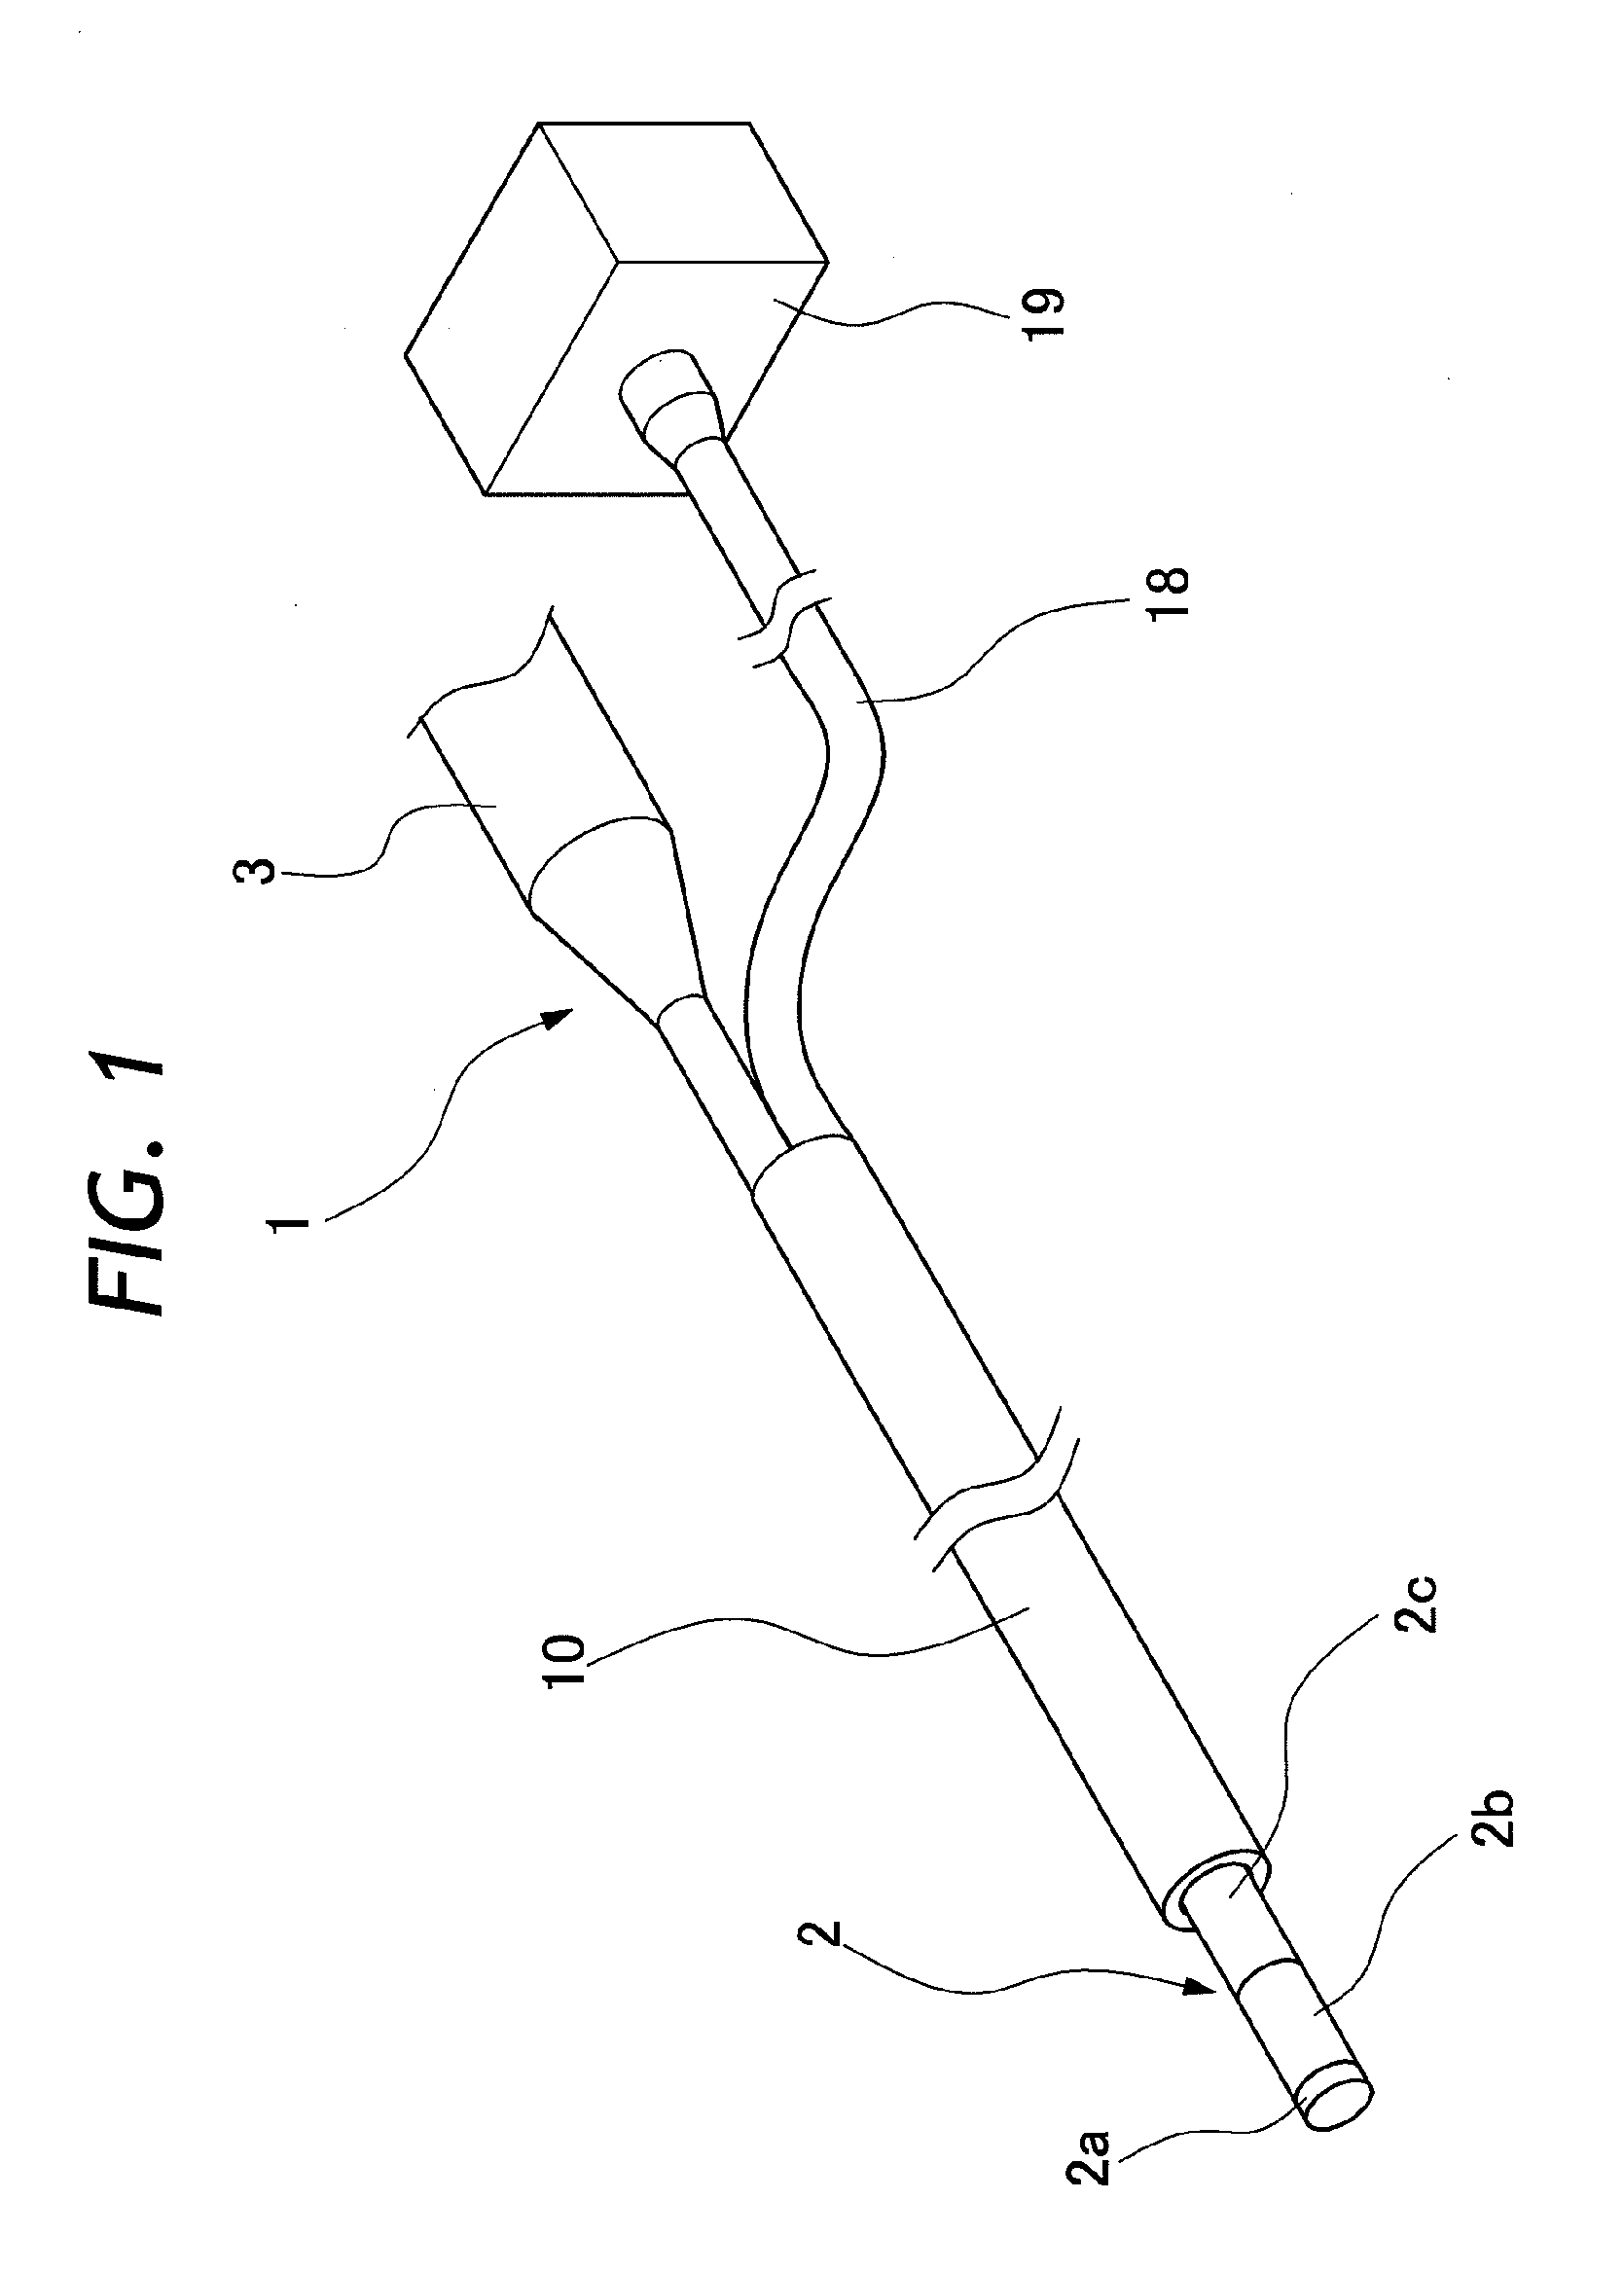 Guide tube for guiding endoscope or surgical tool in or into body cavity